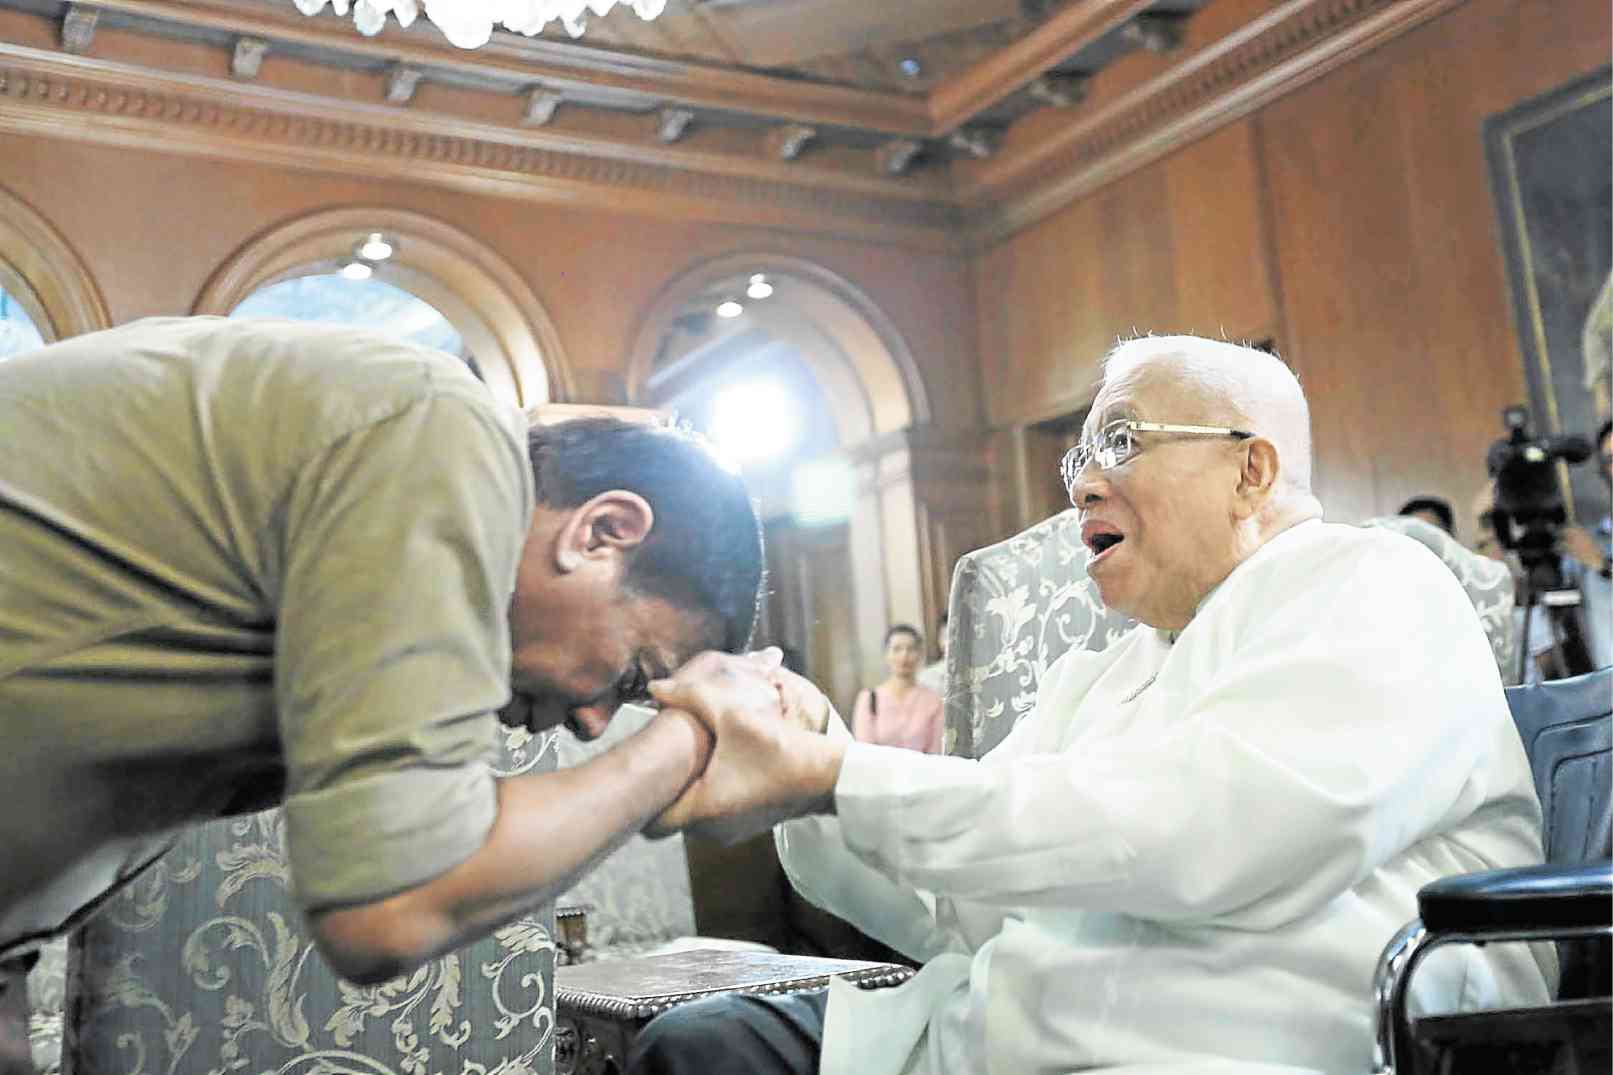 BLESS YOU Cebu Archbishop Emeritus Ricardo Cardinal Vidal (right) says his recent meeting with President Duterte helped establish good rapport between the President and the Catholic Church. PRESIDENTIAL PHOTOGRAPHERS DIVISION